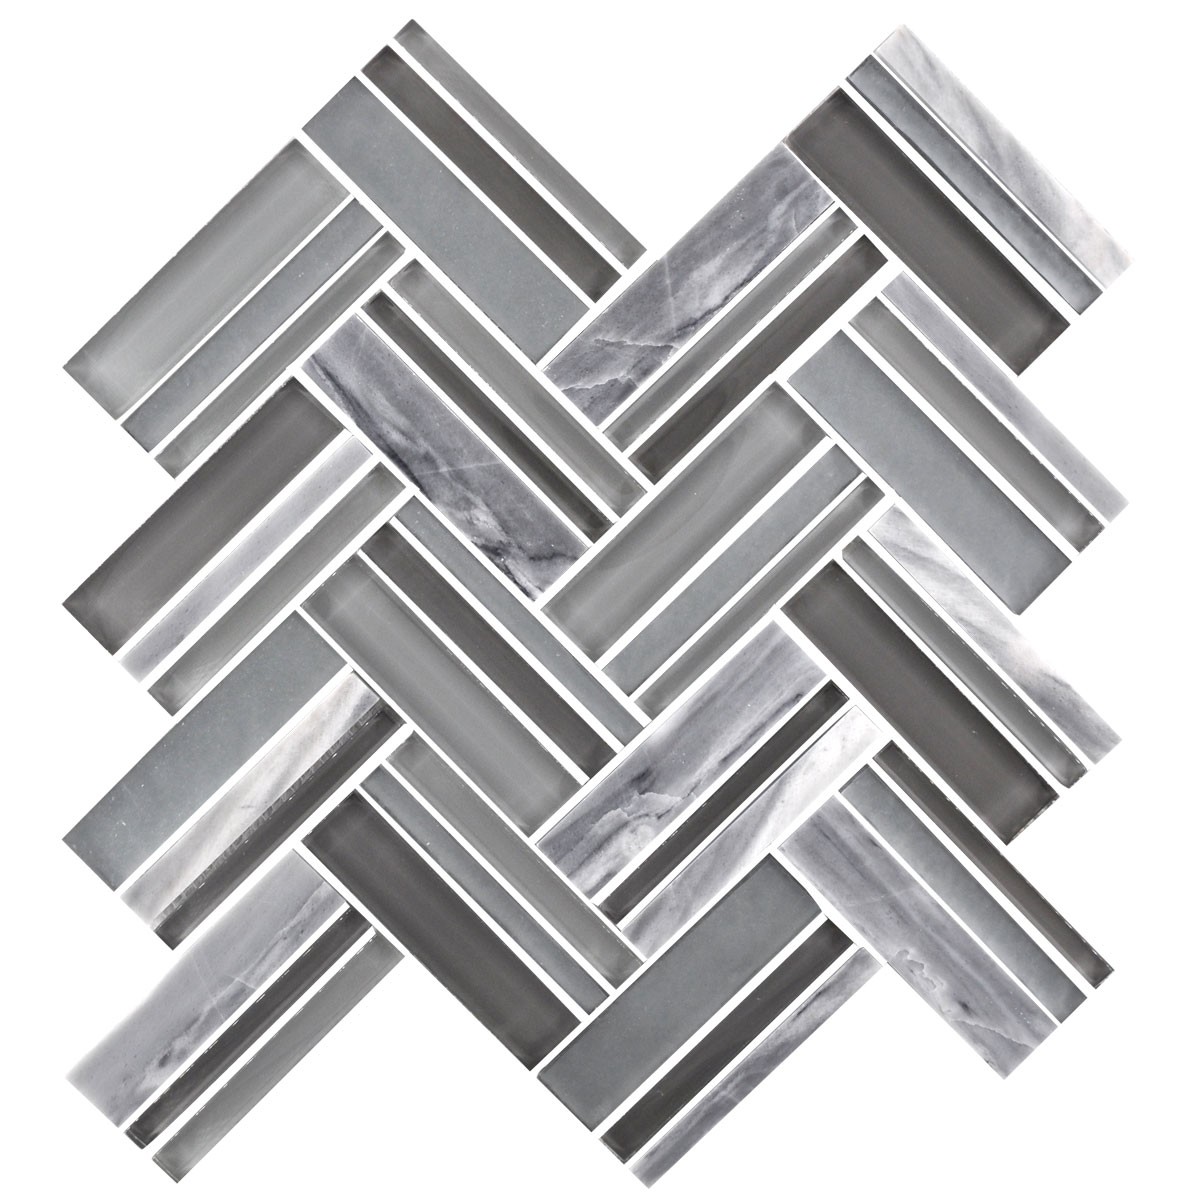 12.4 in. x 13.8 in. Glass Stone Blend Strip Mosaic Tile in Grey - 8mm Thickness (DK-8NF0606-005)